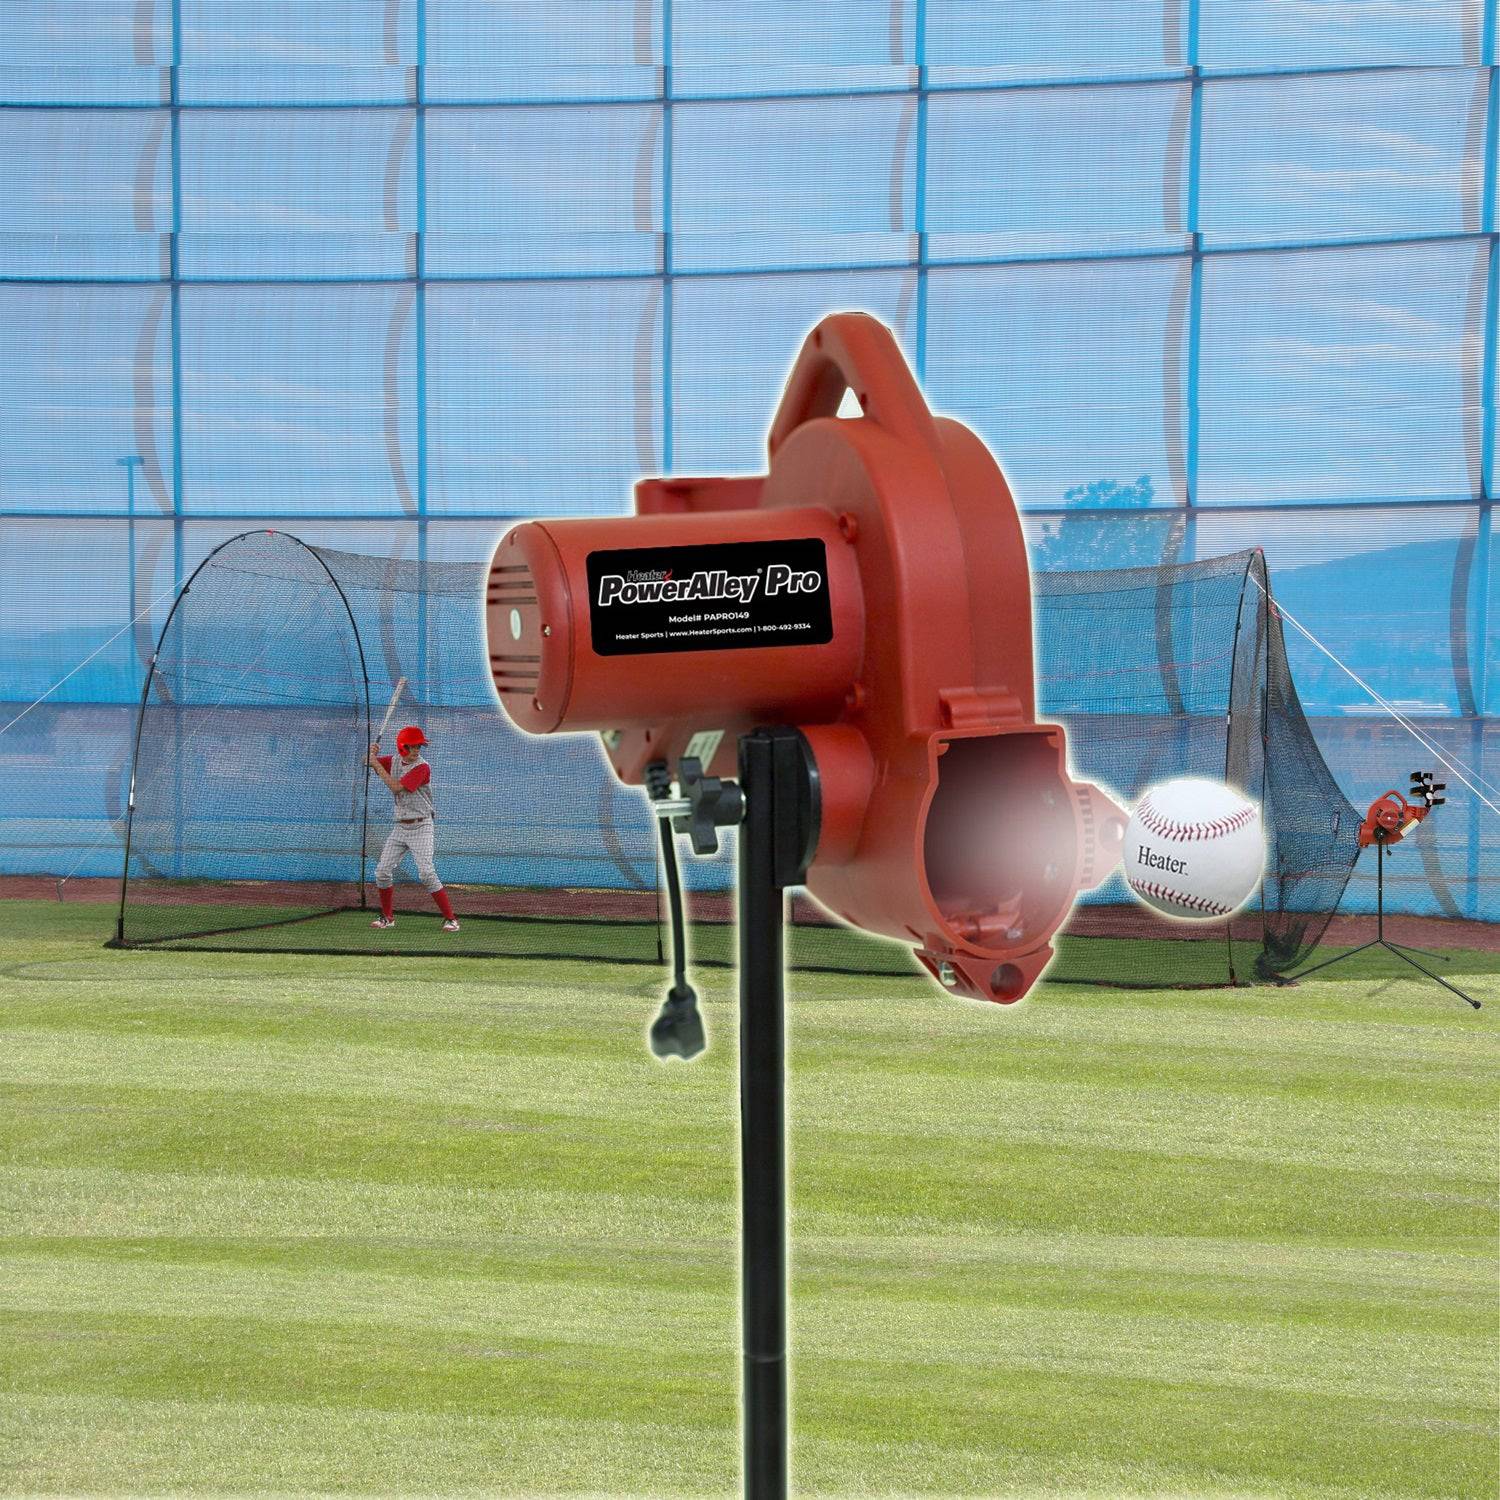 Heater Sports PowerAlley Pro Real Ball Machine & 22' Cage